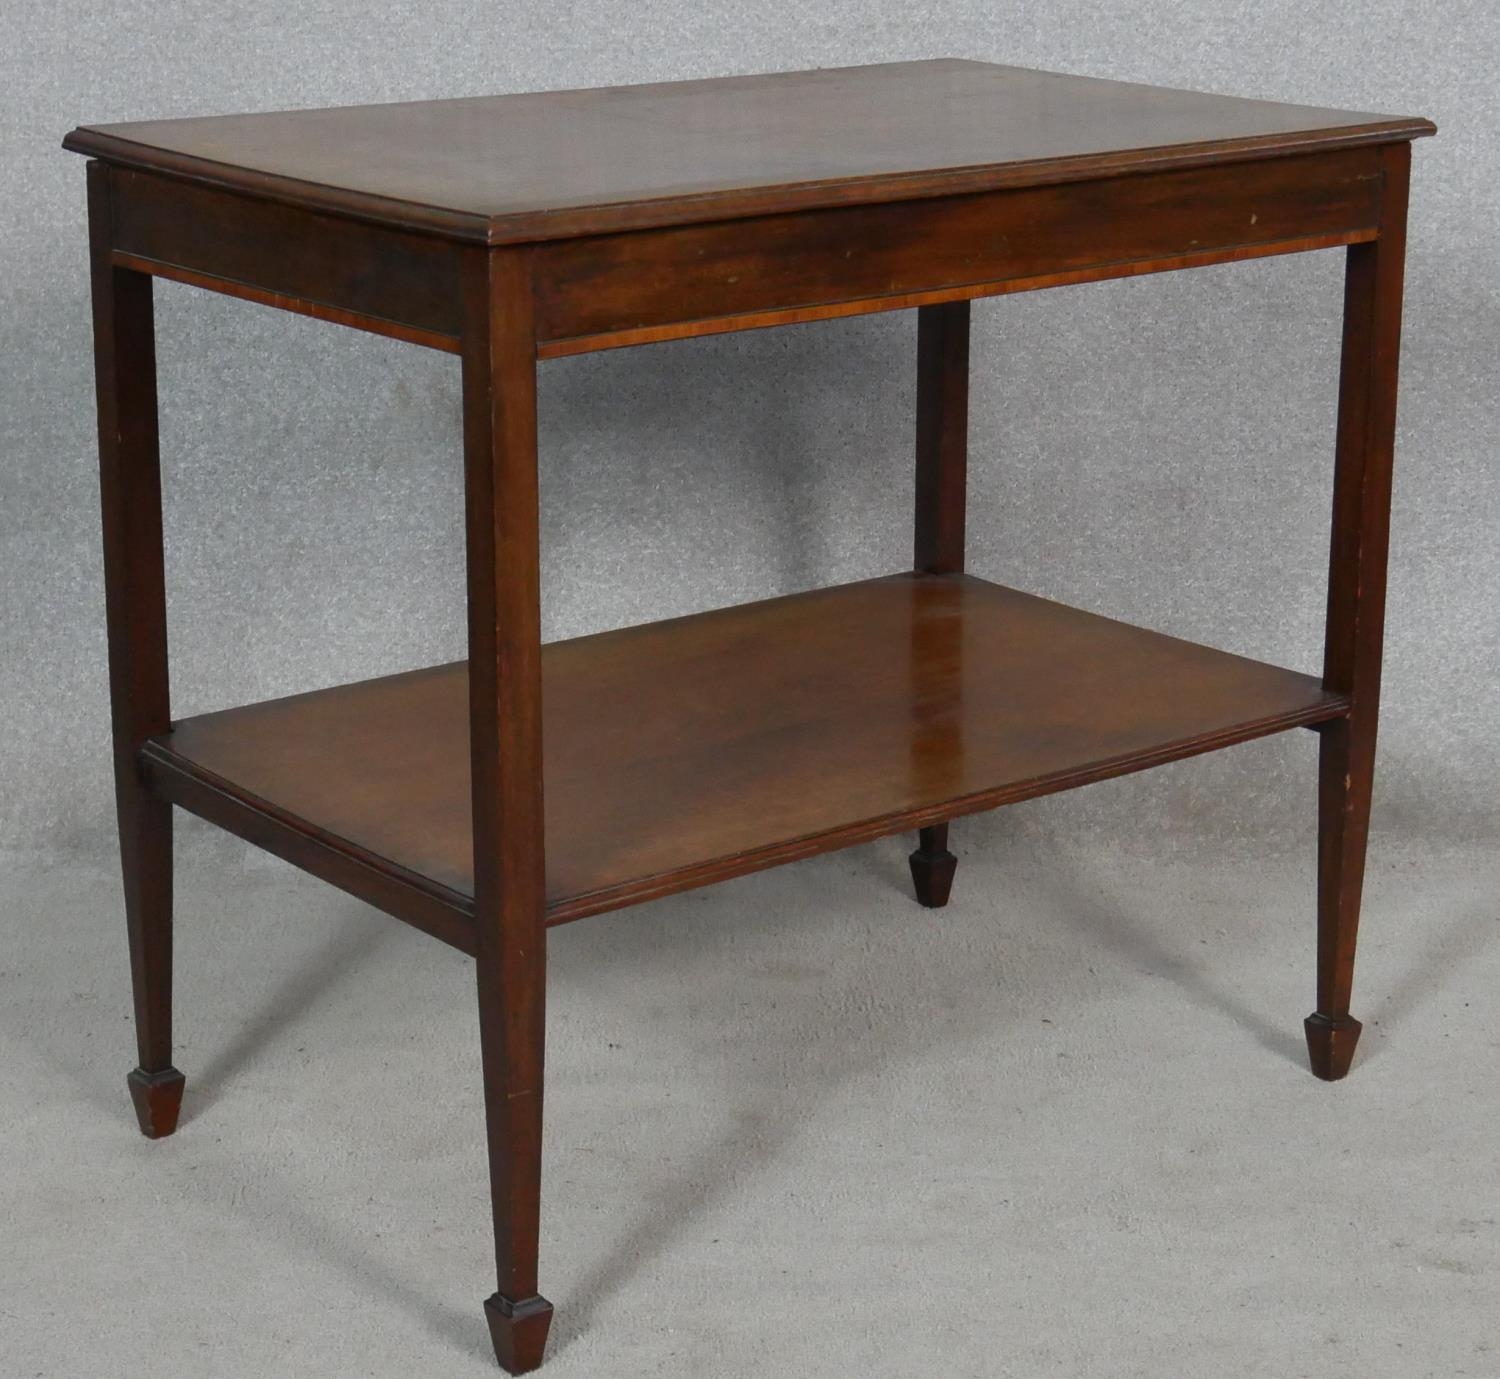 A C.1900 mahogany and satinwood inlaid two tier occasional table. H.76 L.84 W.53cm - Image 3 of 5